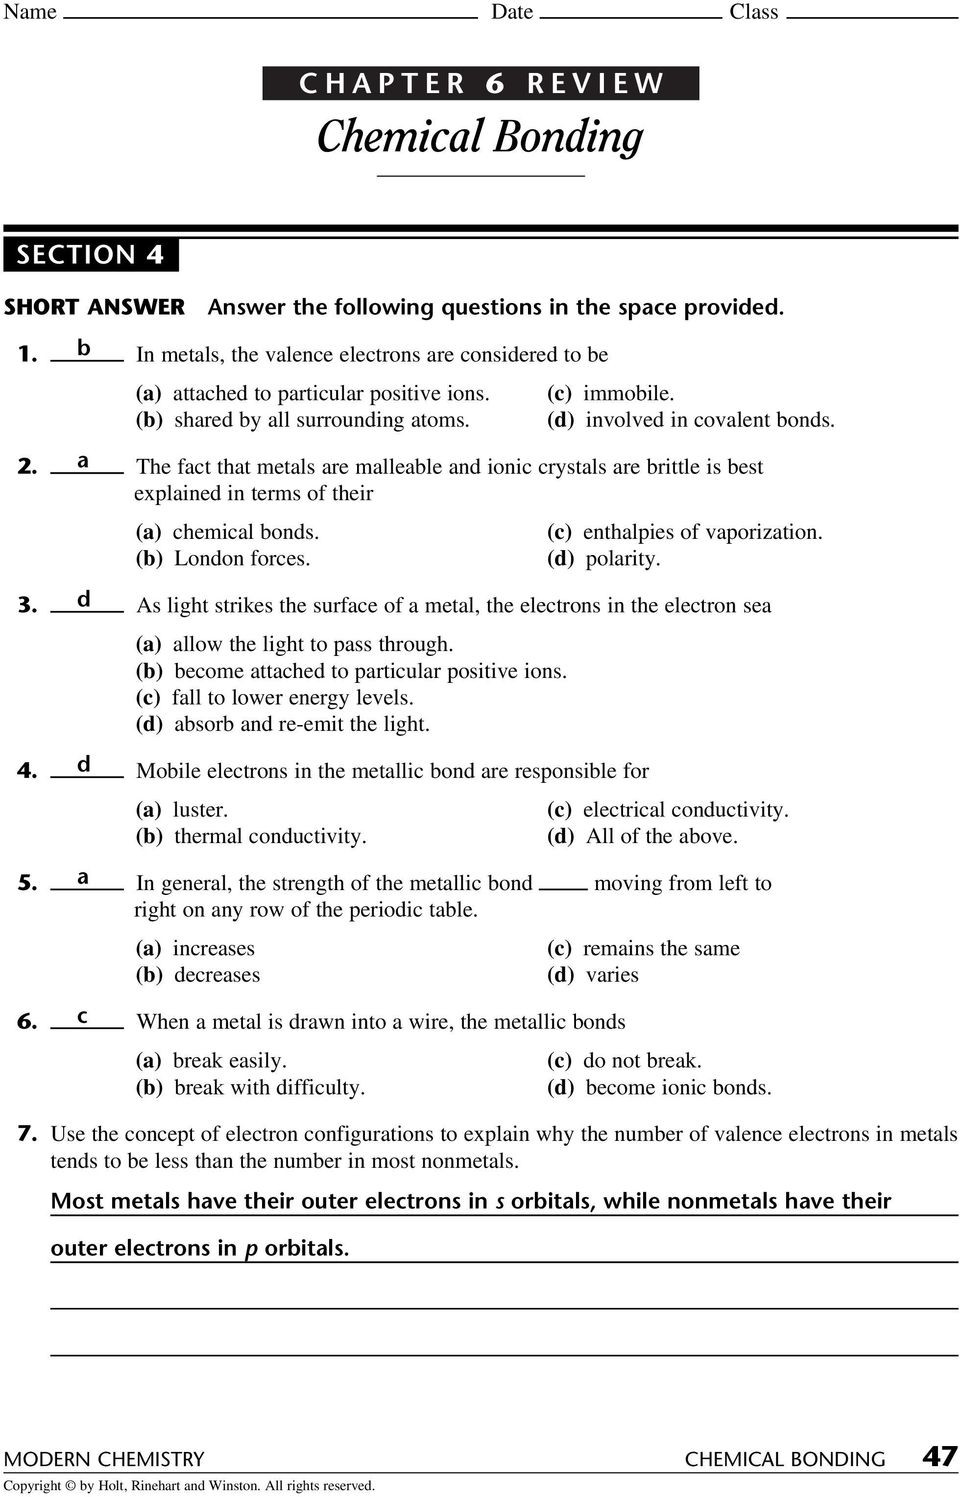 Chemical Bonds Worksheet Answers Chapter 6 Review Chemical Bonding Answer the Following